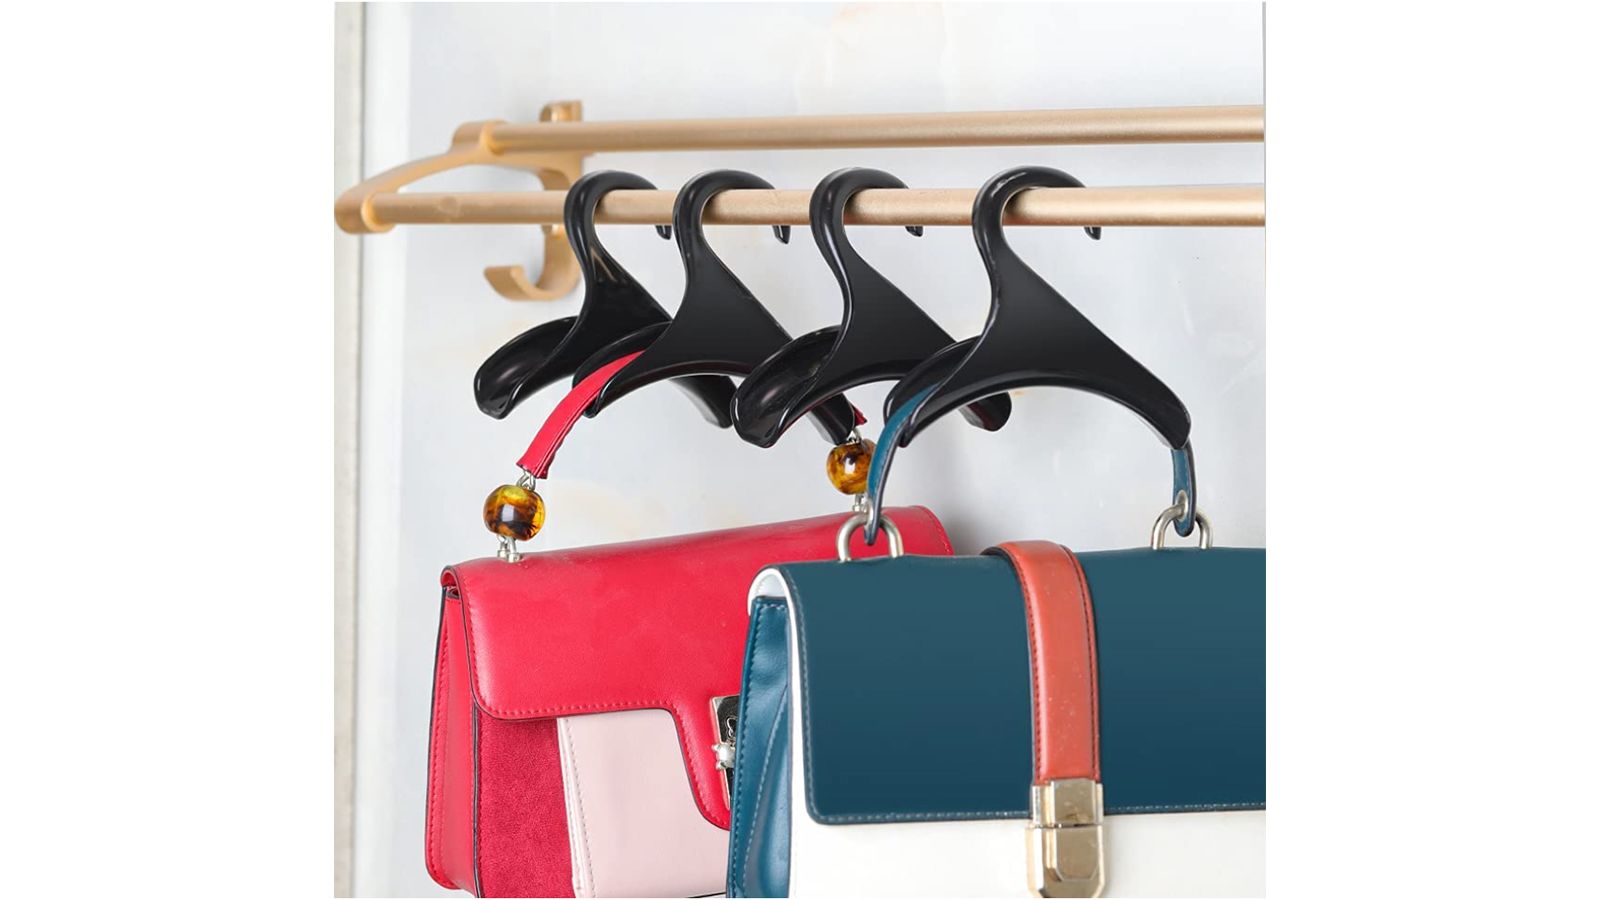 17 Creative Bags Storage Ideas - Shelterness